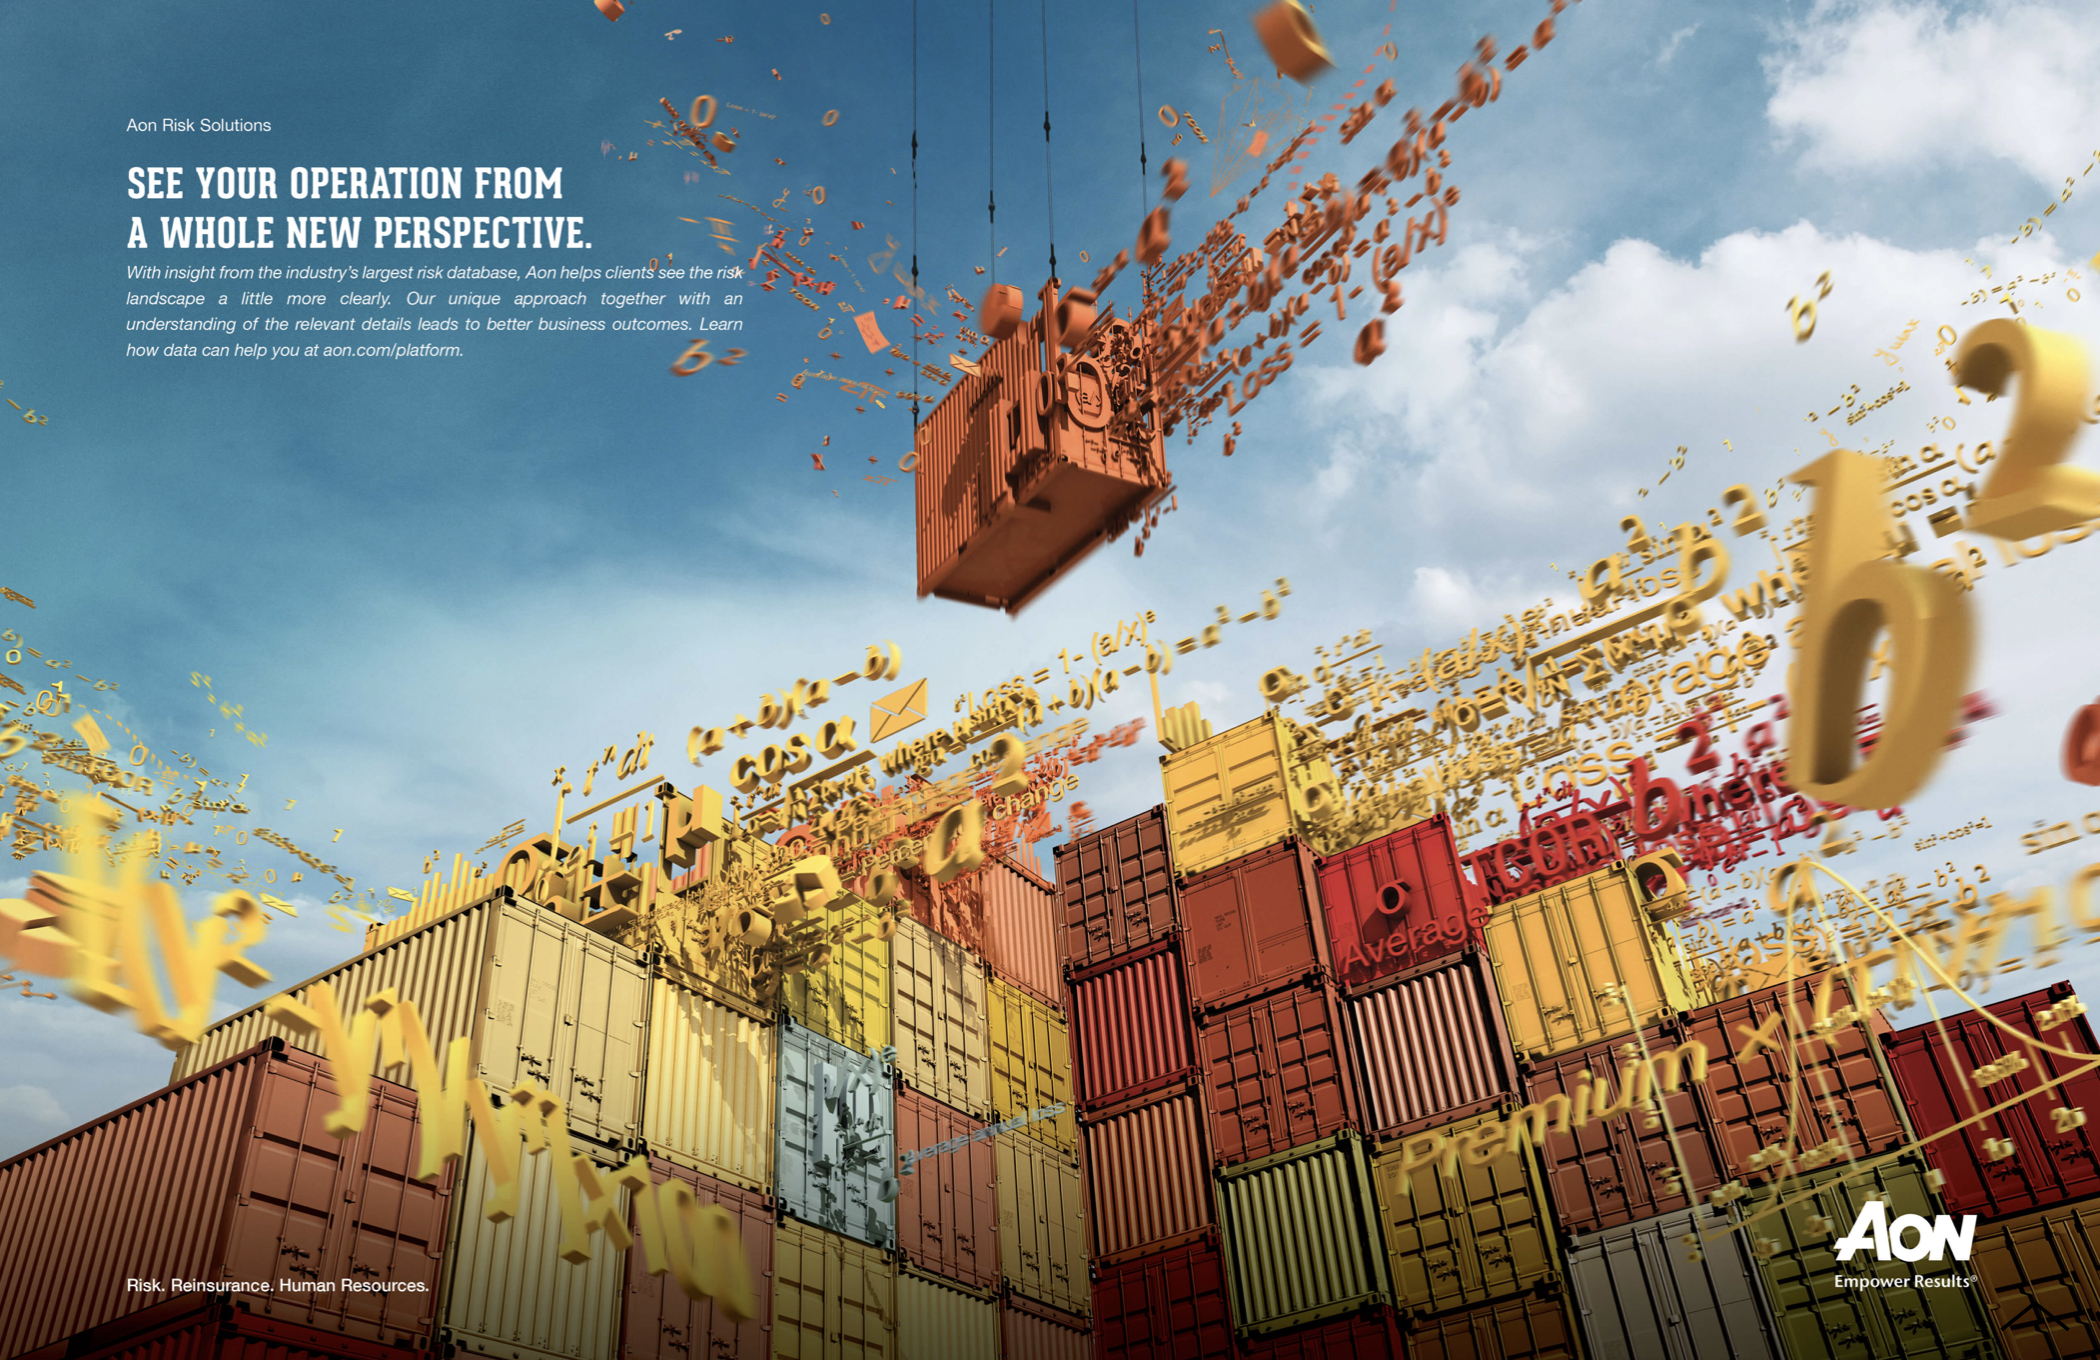 Aon Shipping Container Poster